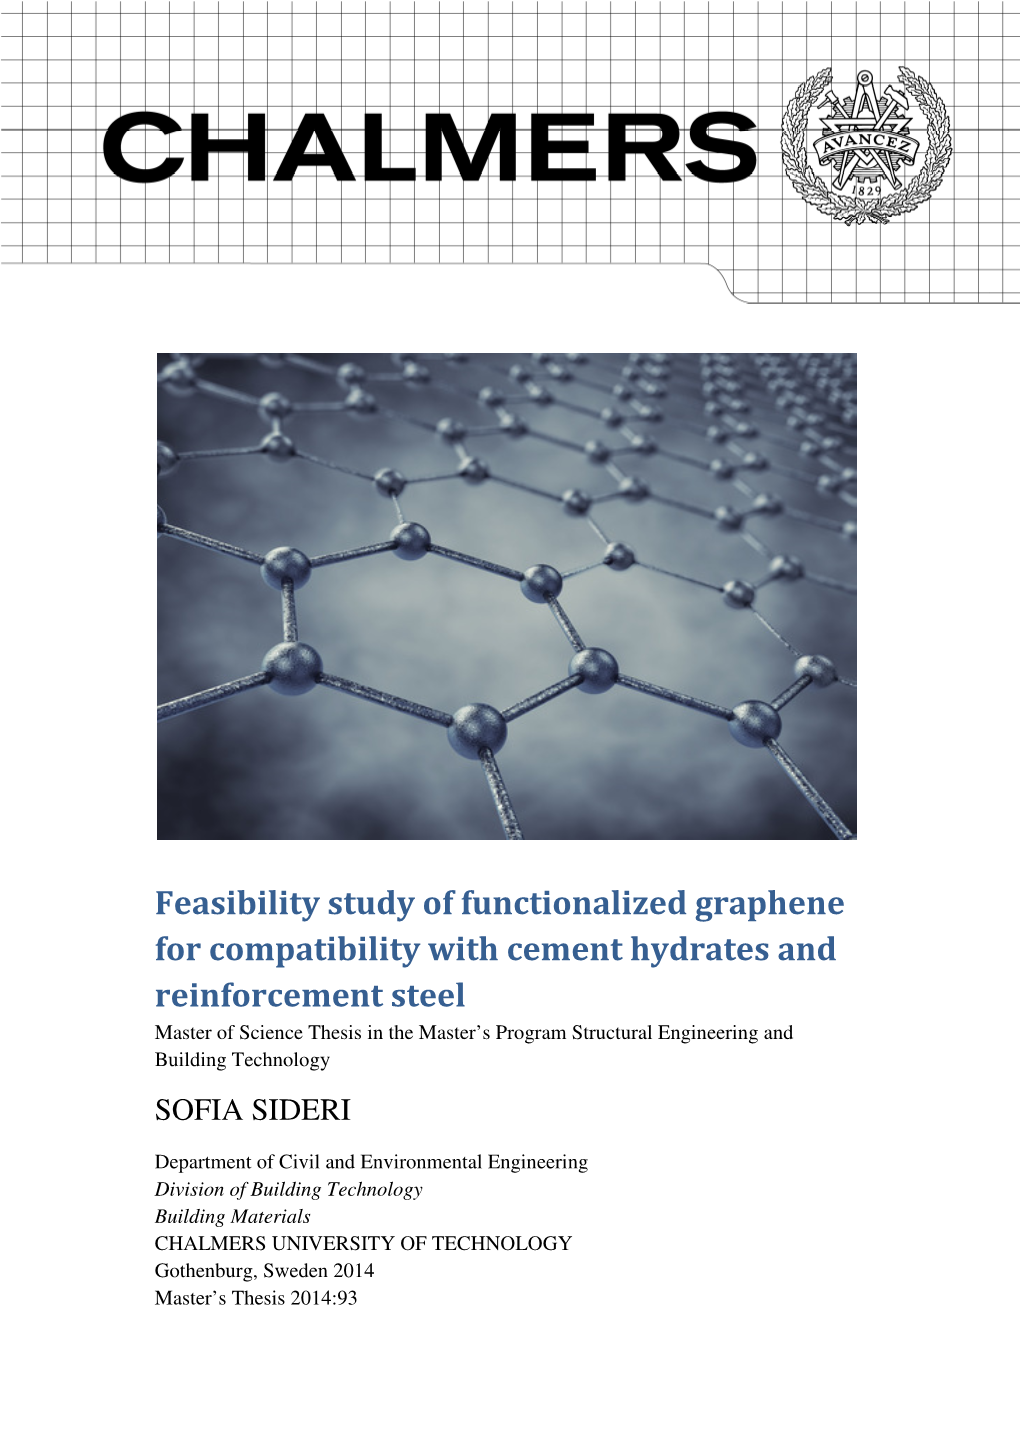 Feasibility Study of Functionalized Graphene for Compatibility With